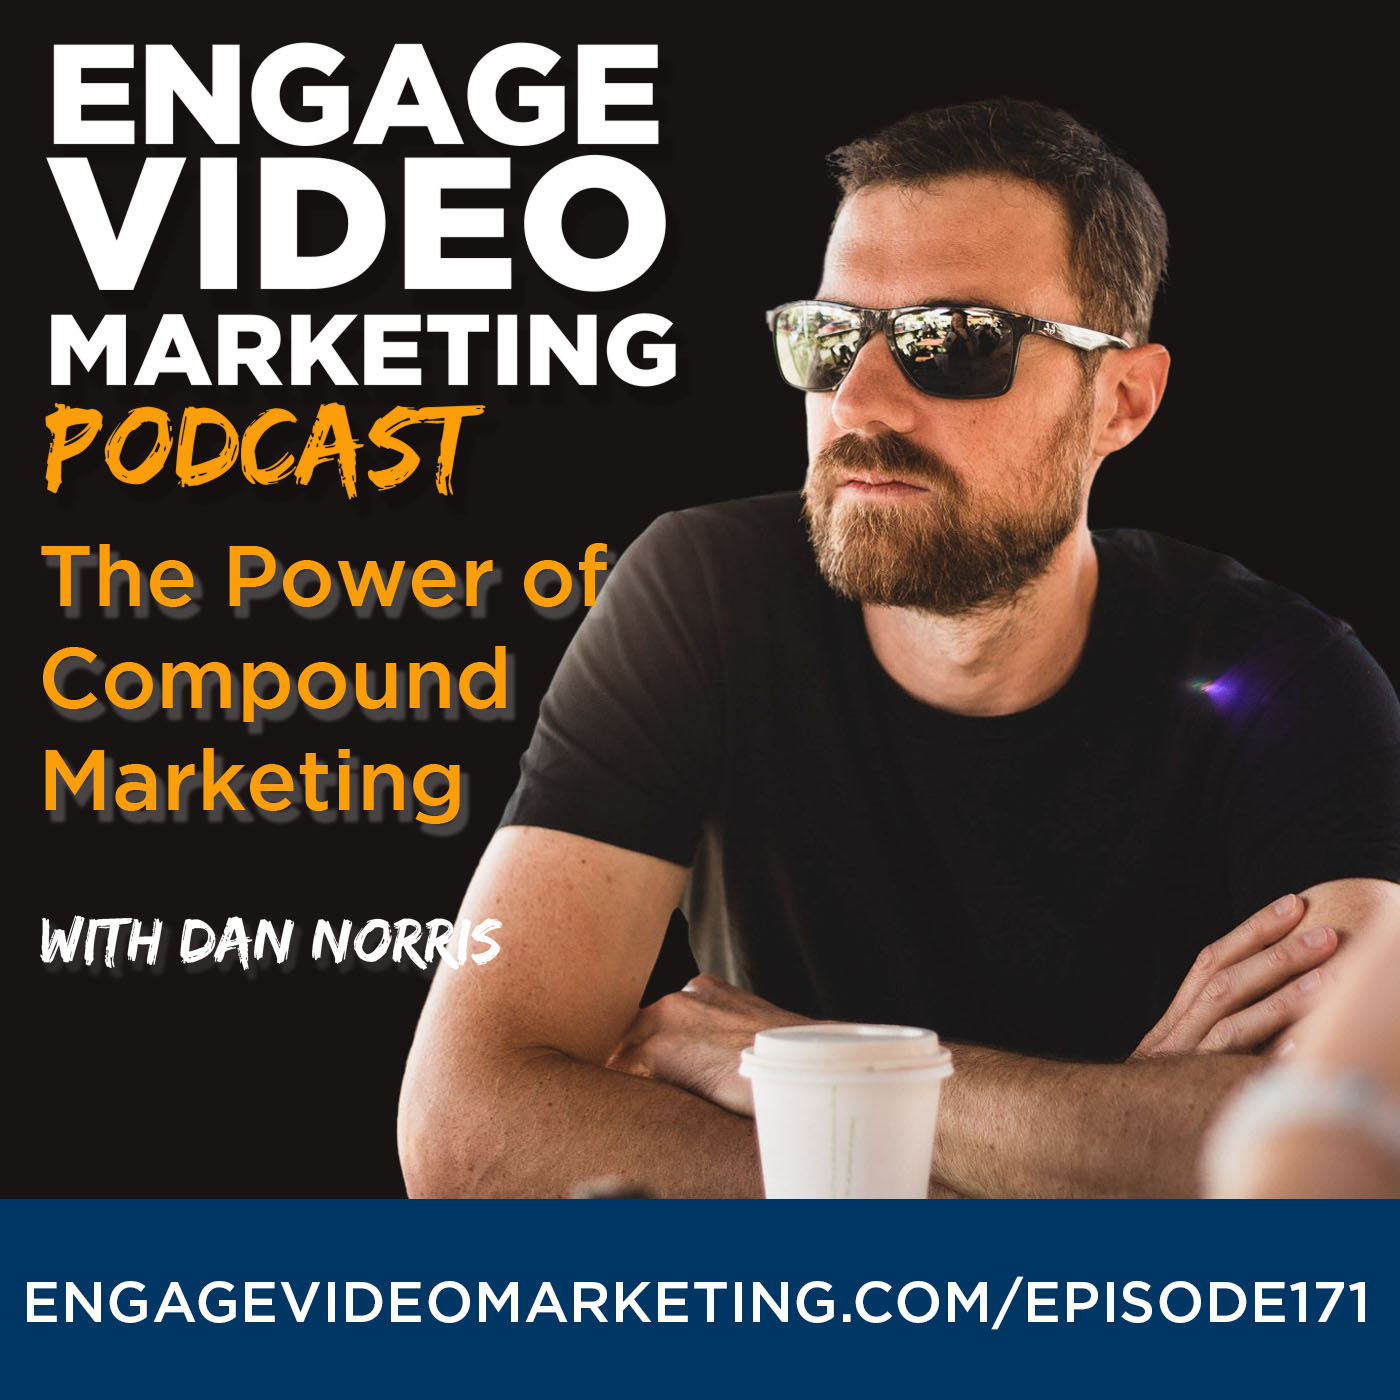 The Power of Compound Marketing with Dan Norris